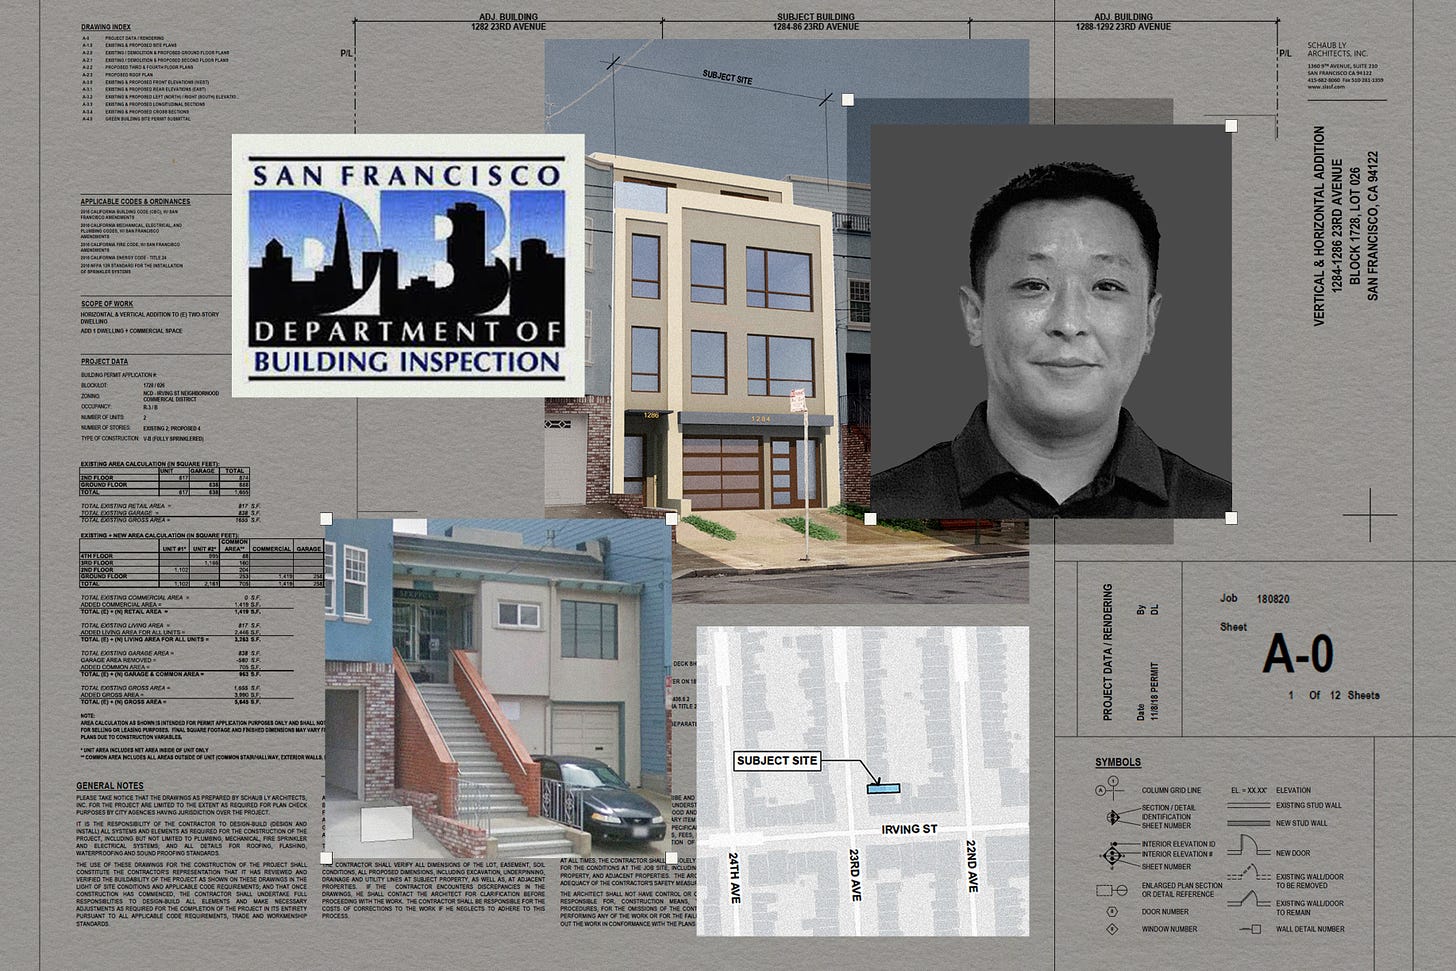 An illustration showing building plans and a photo of building inspector Van Zeng and his home.